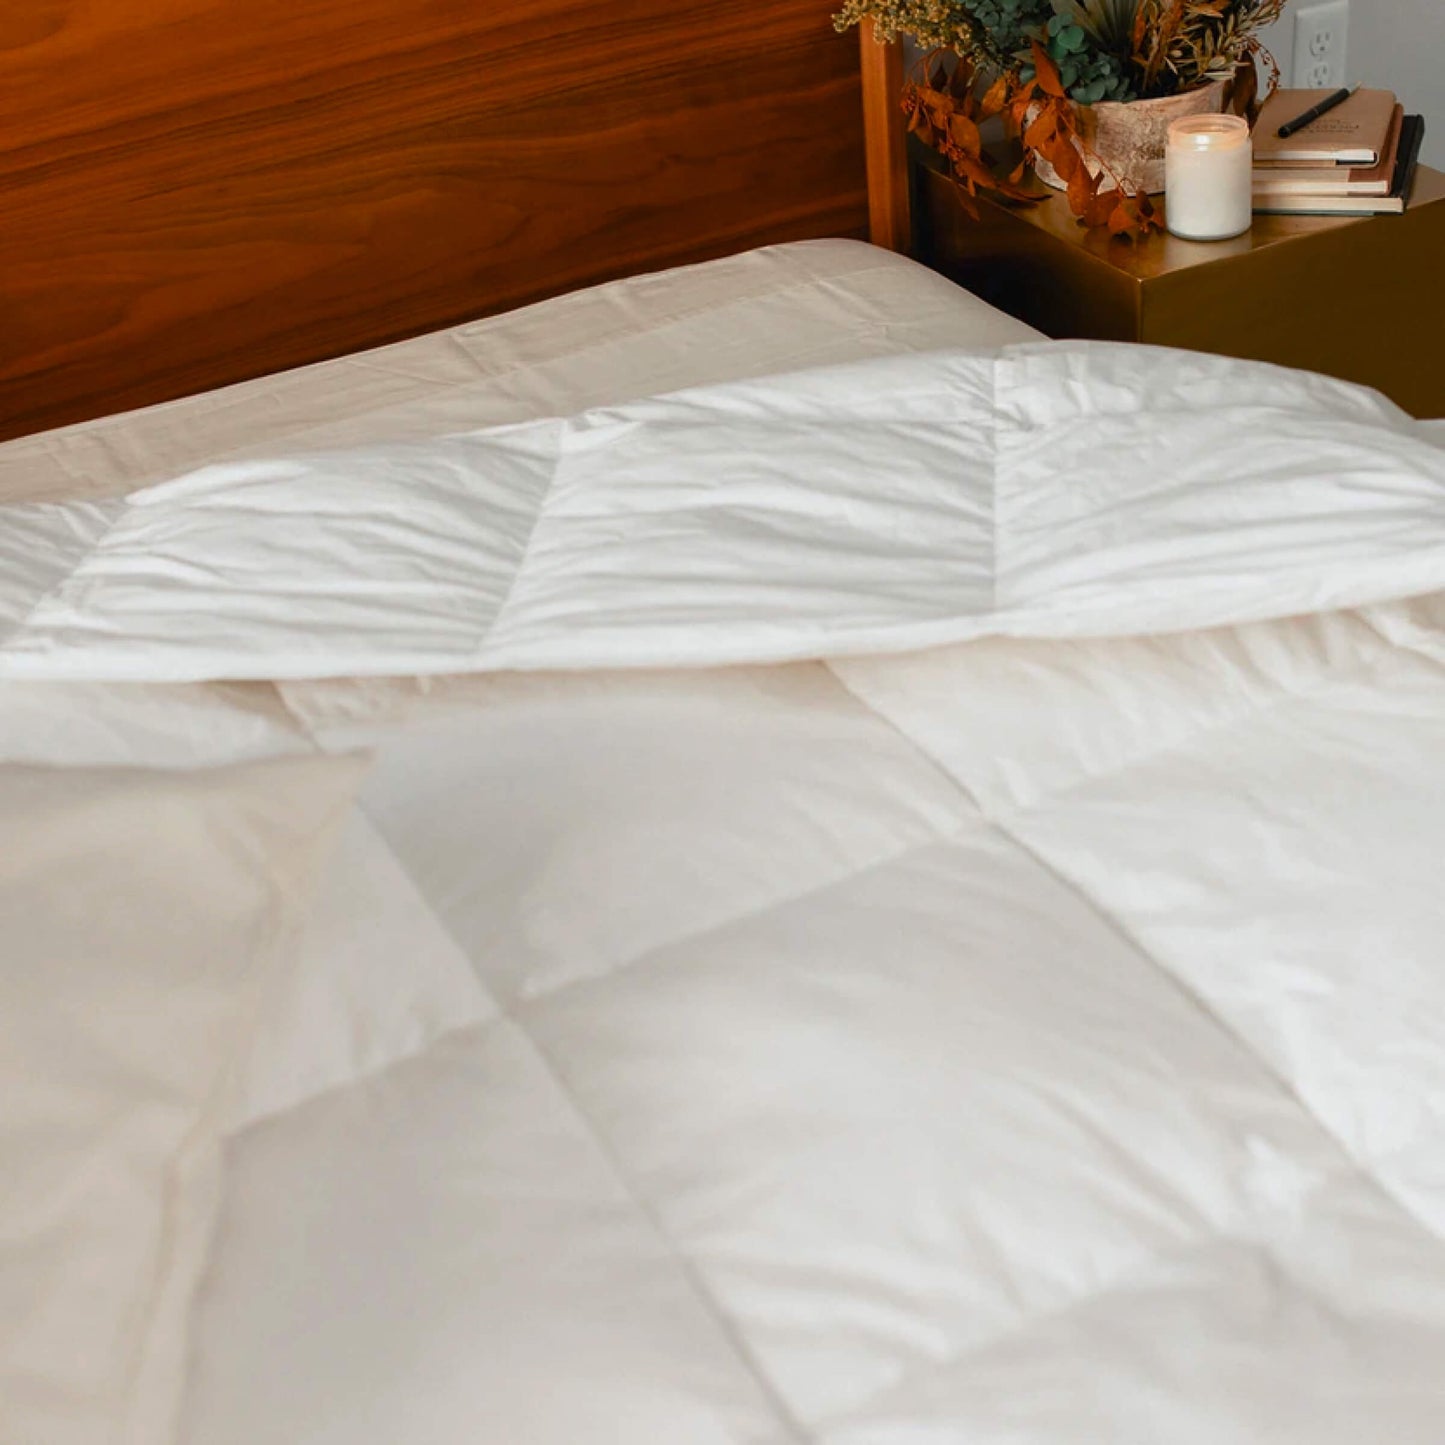 A modern bedroom with the Slumber Cloud Down Comforter made with temperature regulation technology